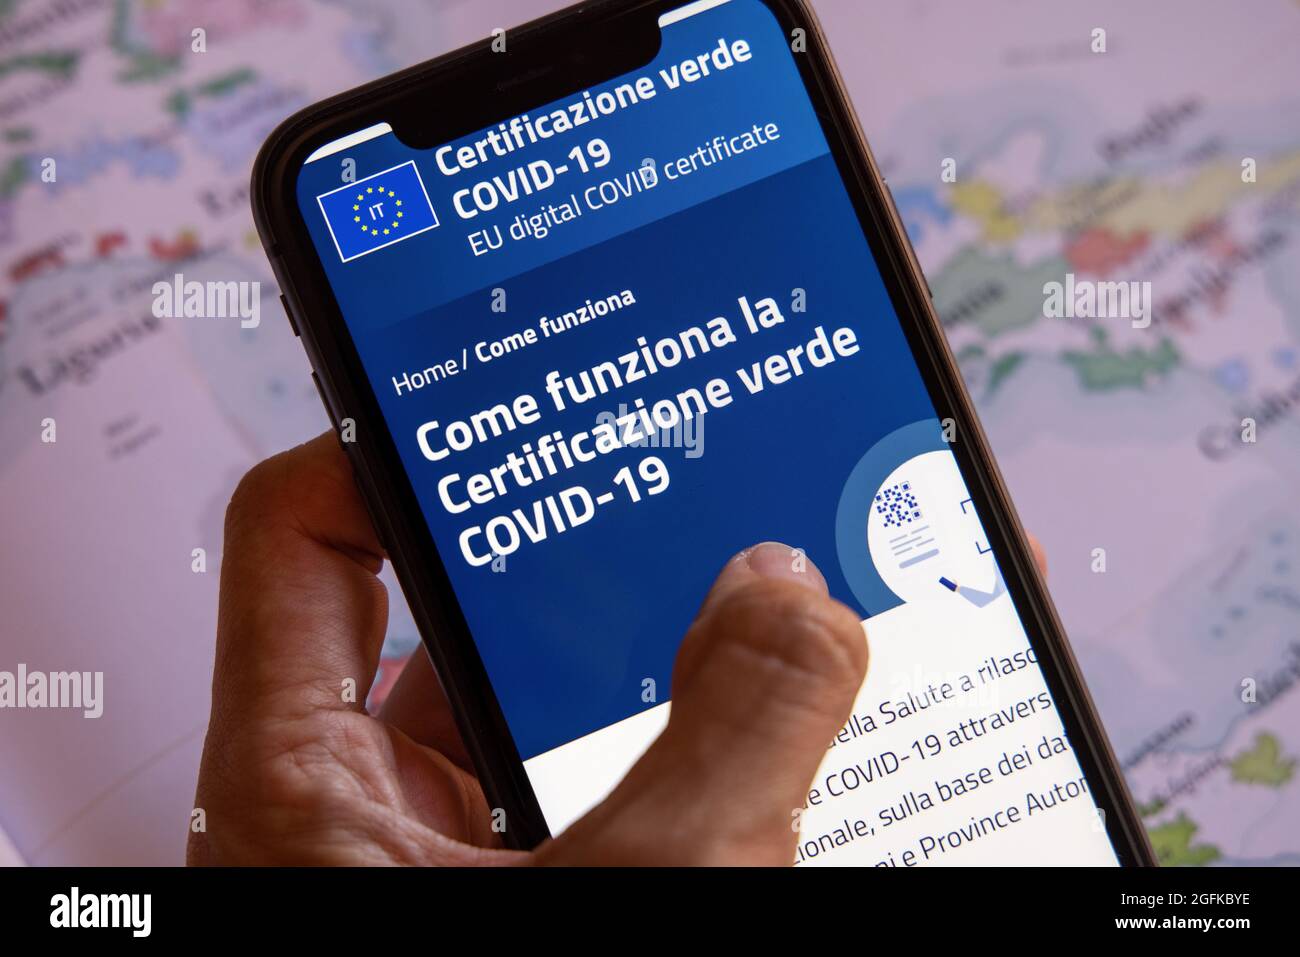 EU Digital certificate Covid-19. Green or Covid Pass. Covid or Coronavirus vaccine certificate, passport app with QR code on map of Europe. Stock Photo